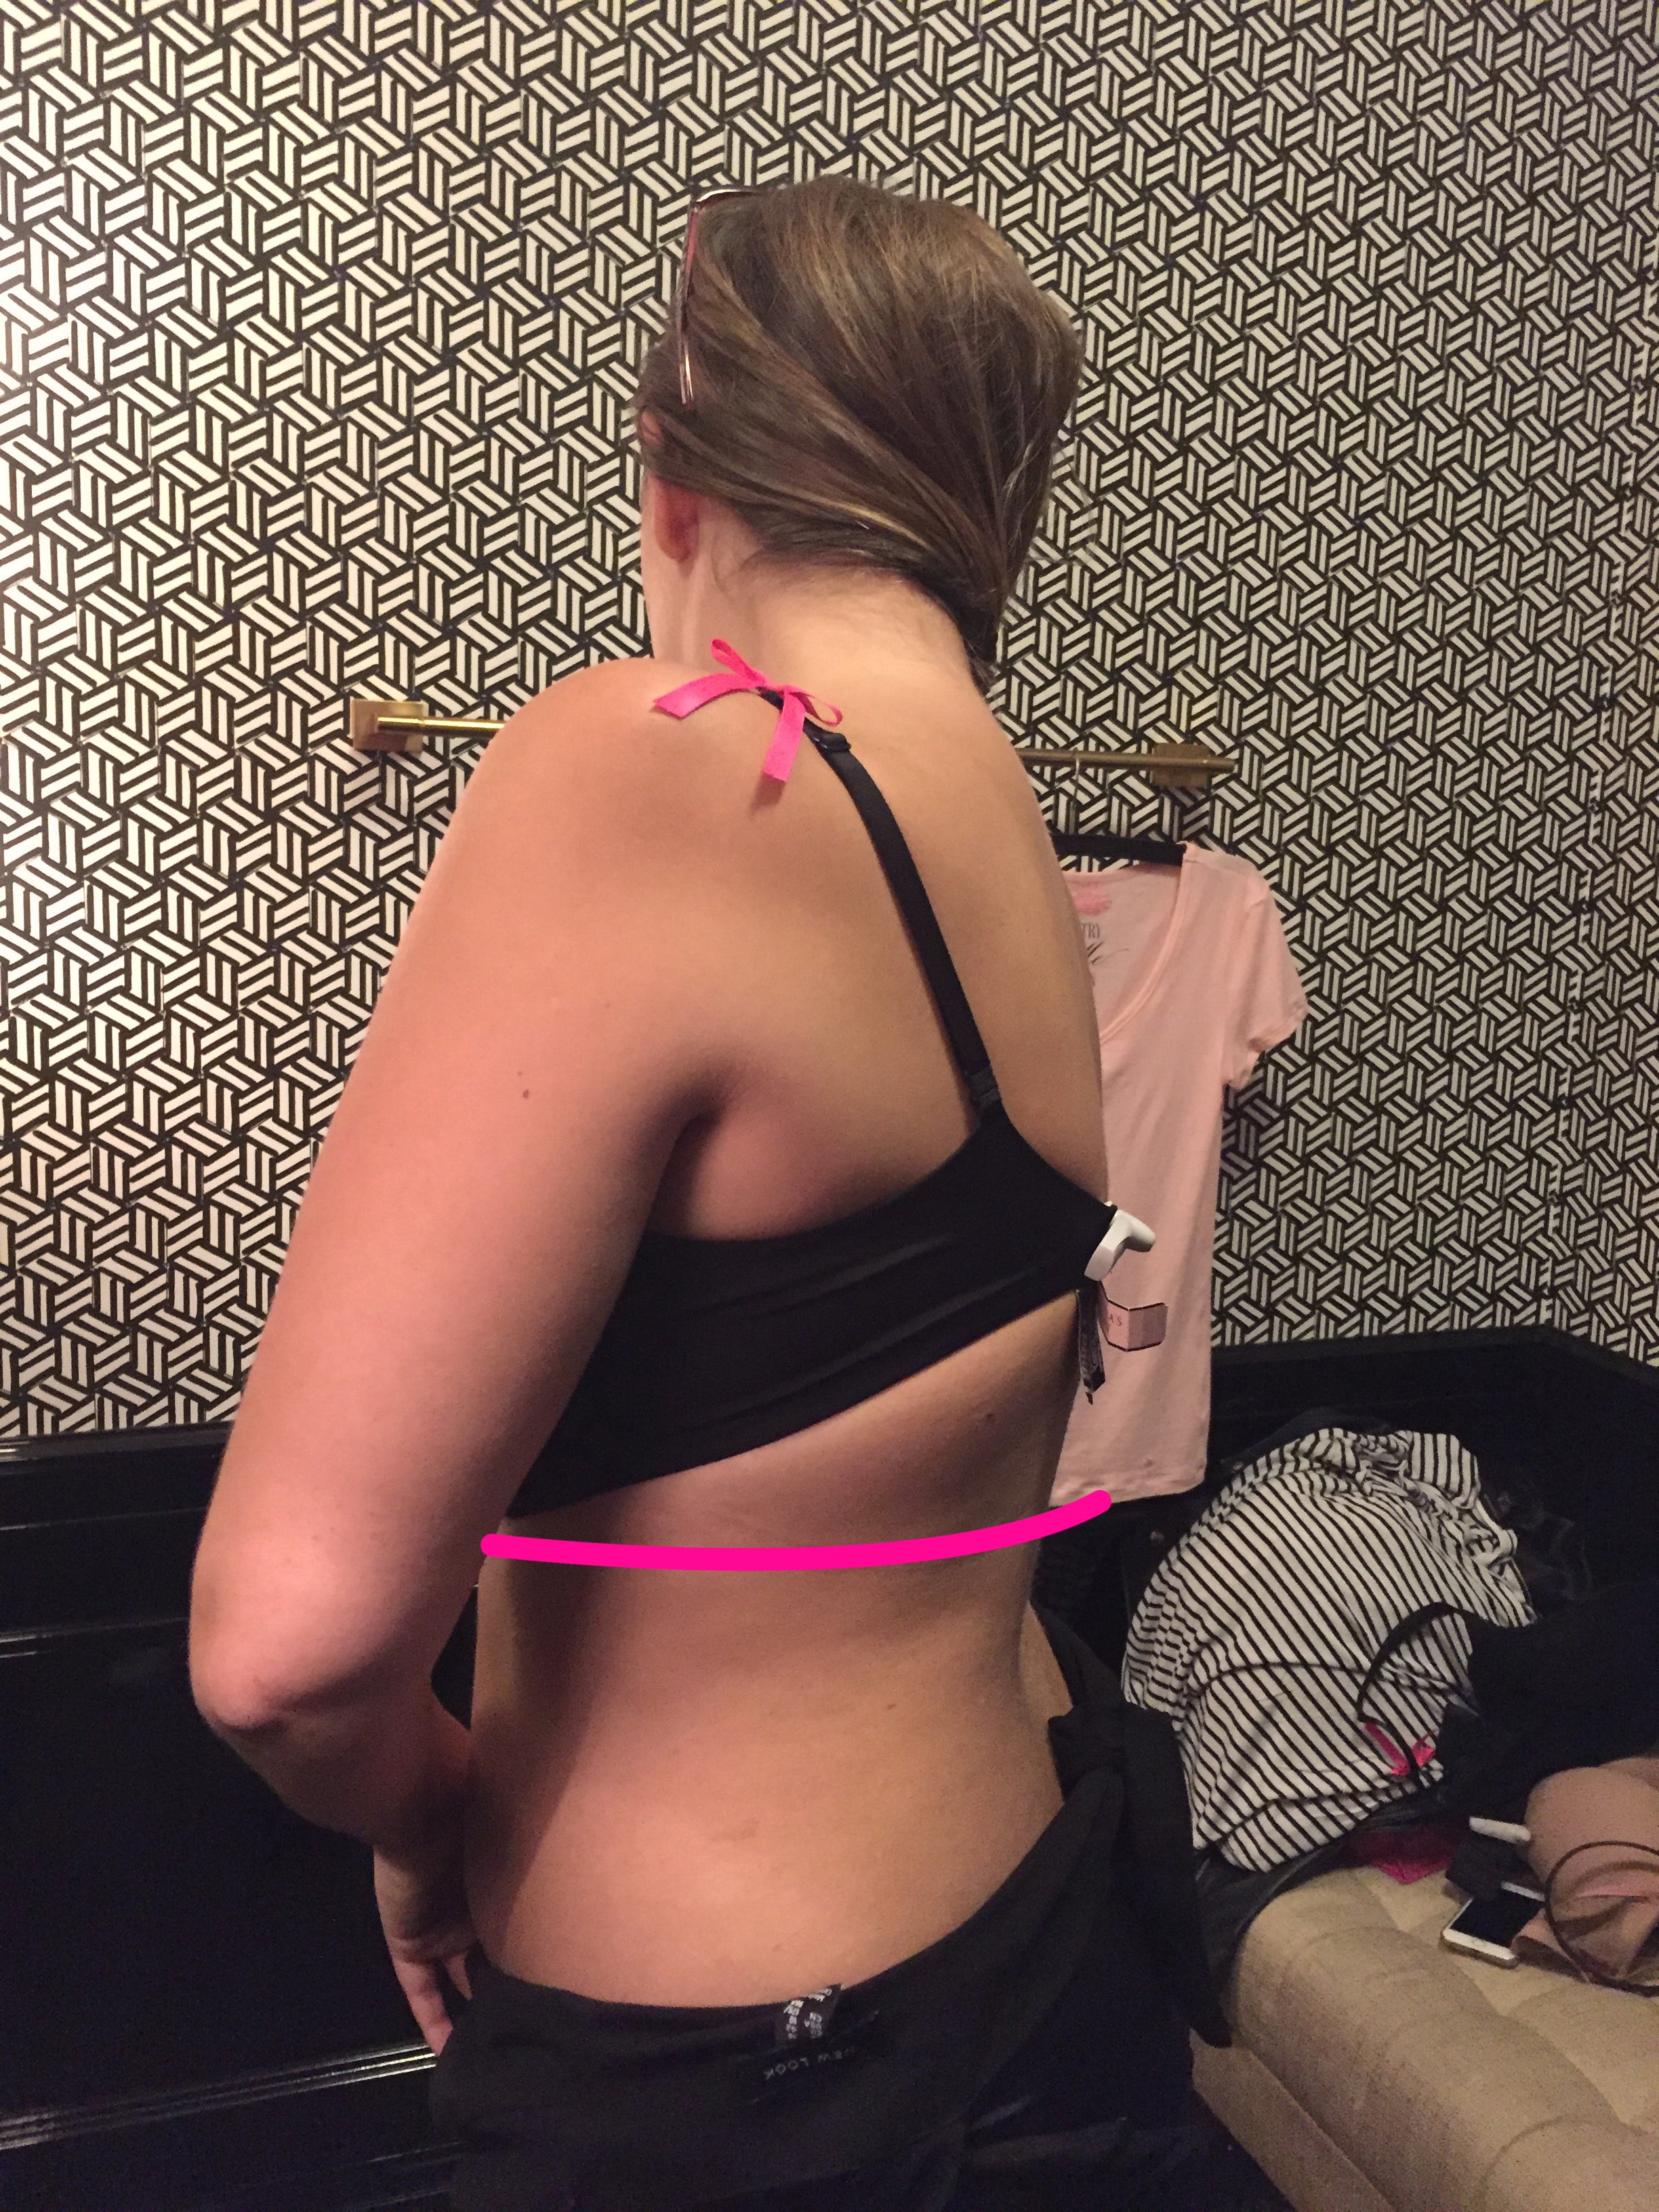 Lingerie Giant shows us exactly how NOT to do a bra fitting